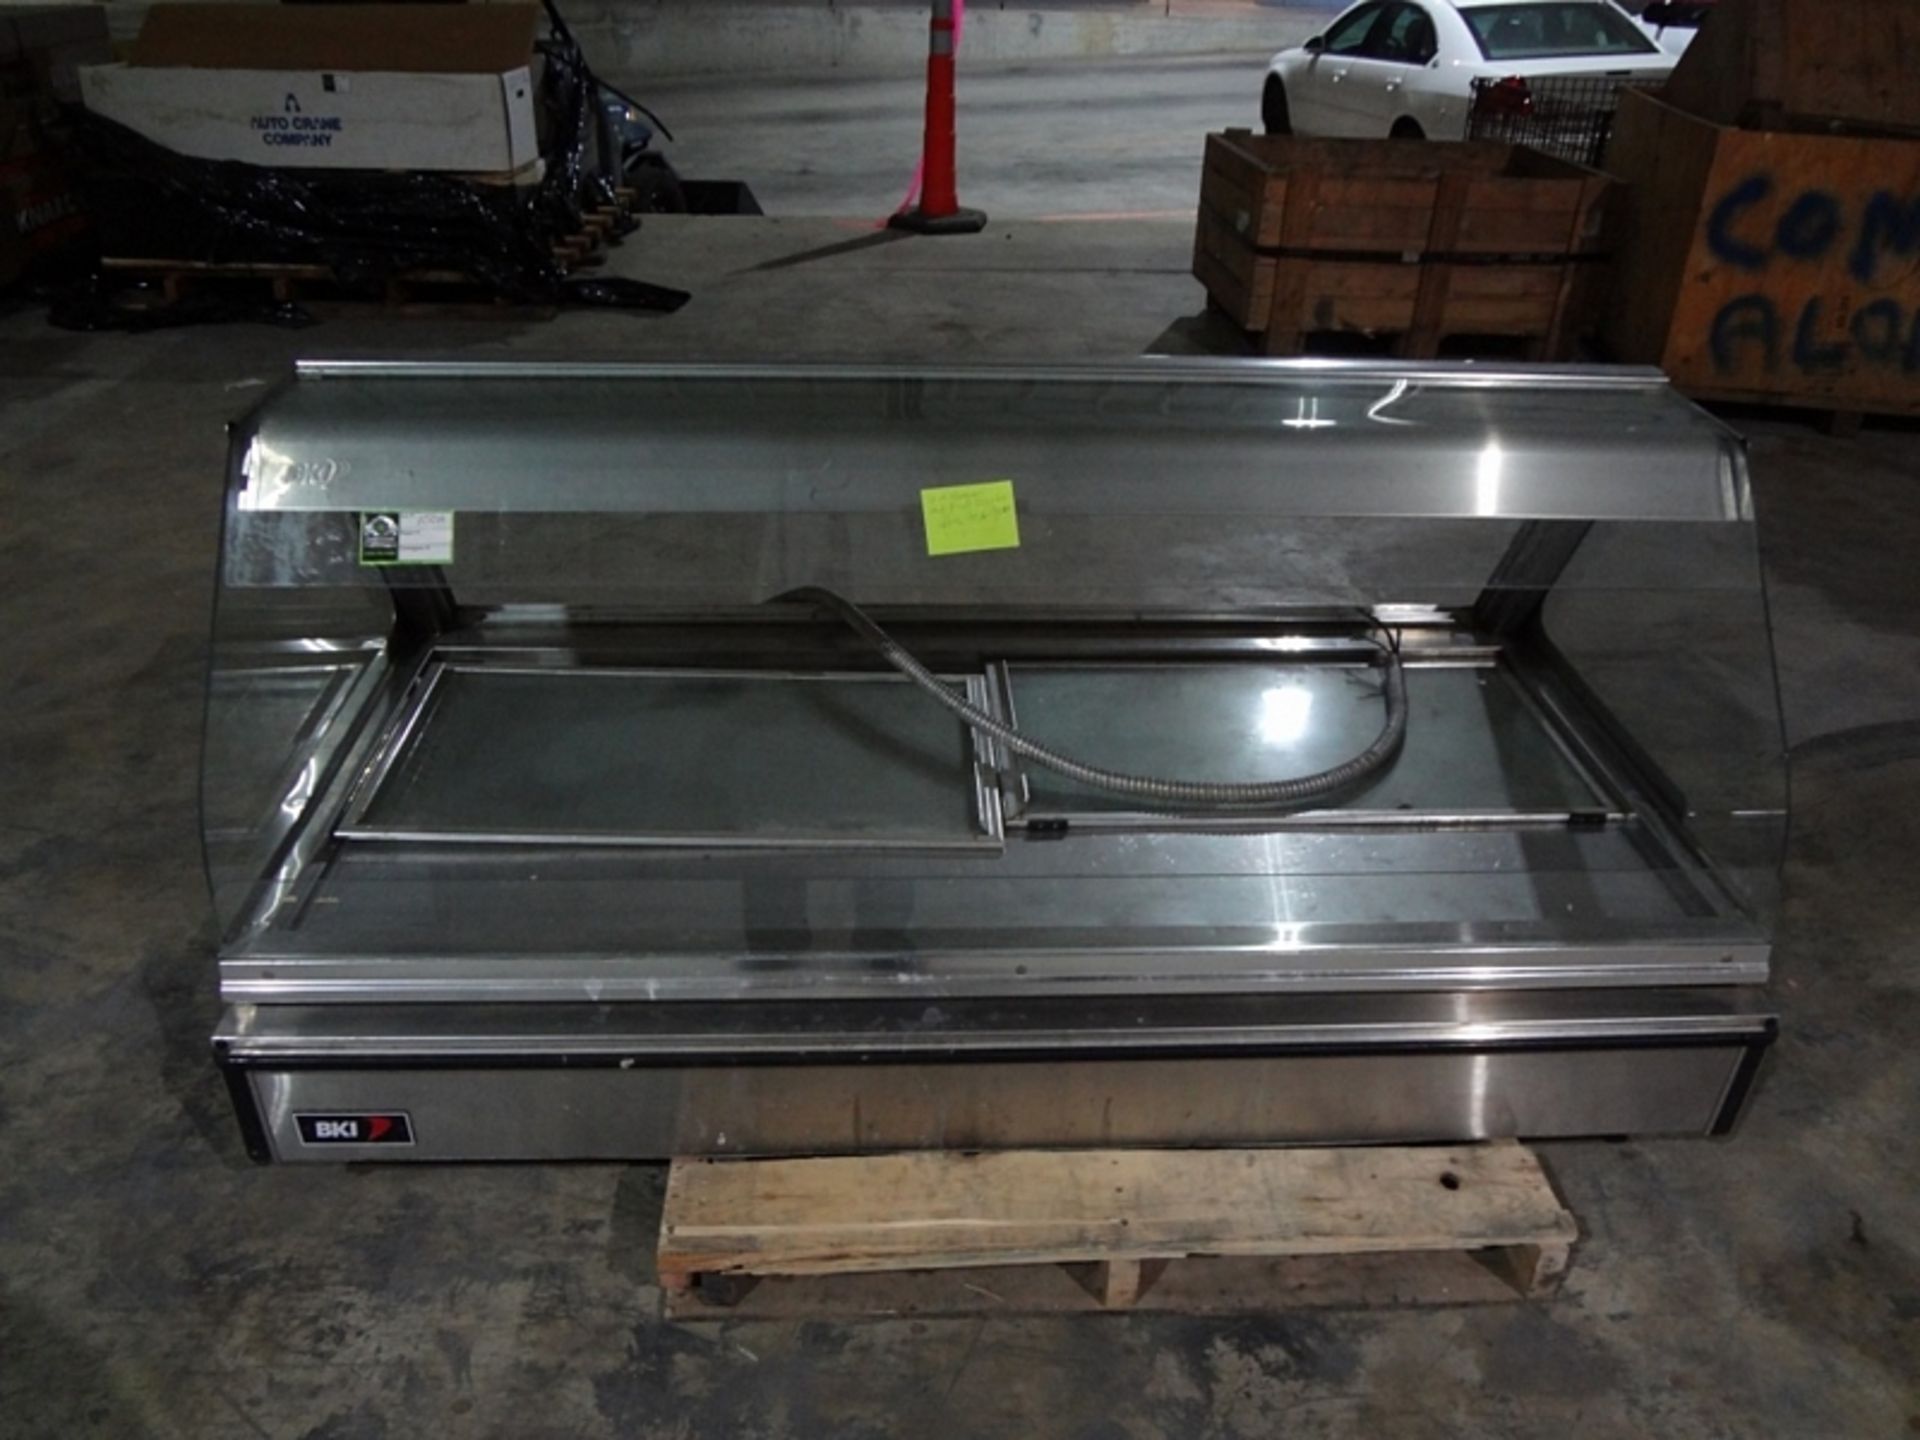 BKI Hot Food Display- ***Located in Chattanooga TN*** MFR - BKI Model - SSW-6T 208 V 19/29 A 6 Kw